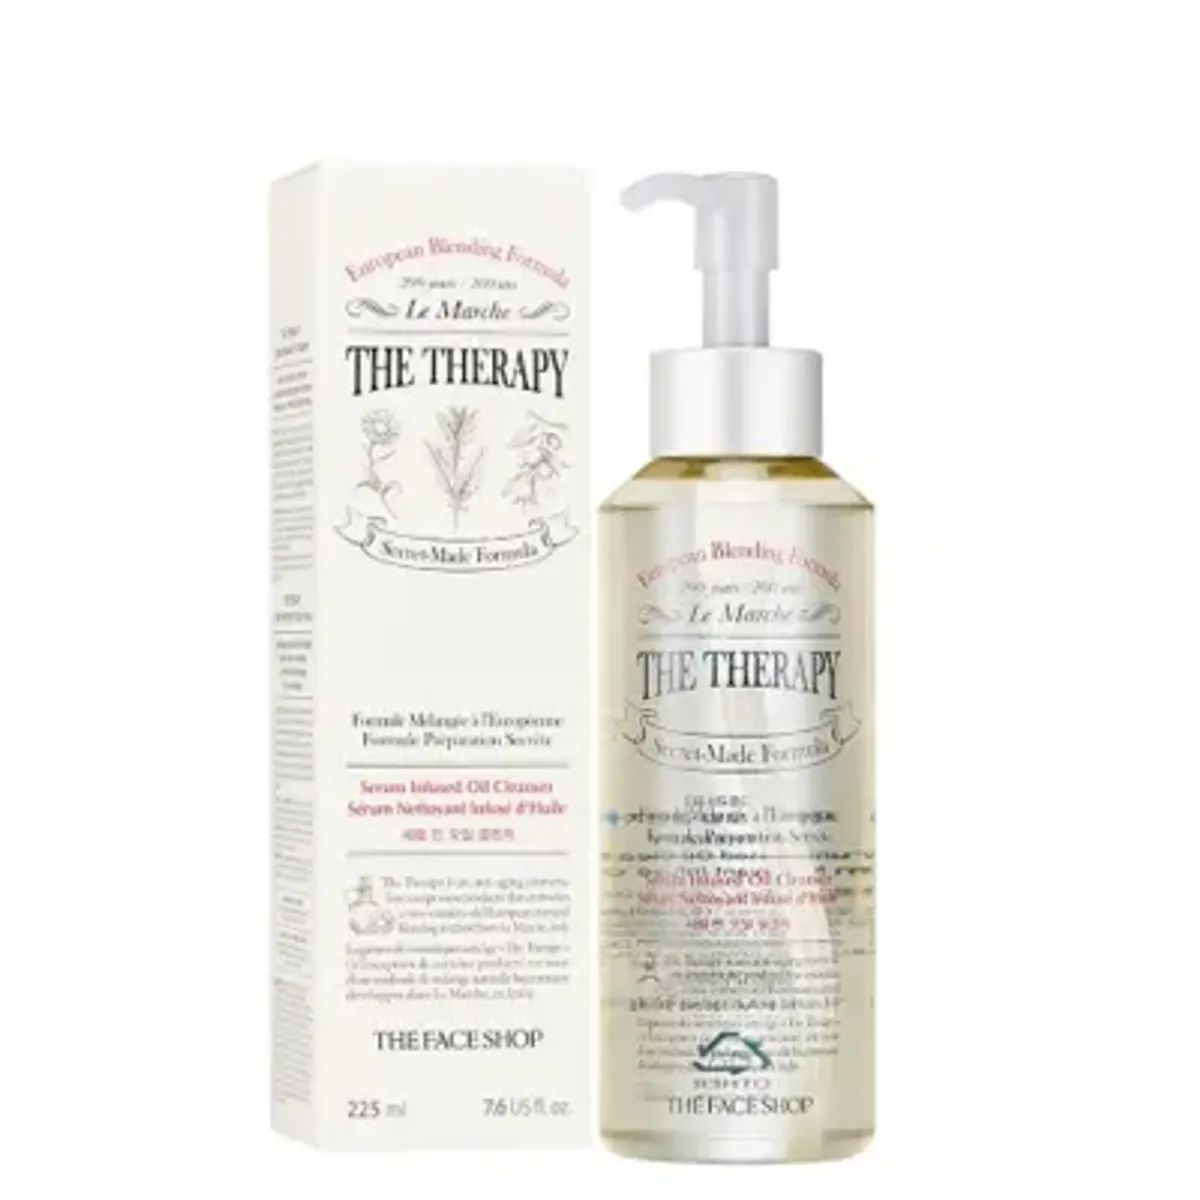 san-pham-lam-sach-da-nang-the-therapy-serum-infused-oil-cleanser-225ml-1